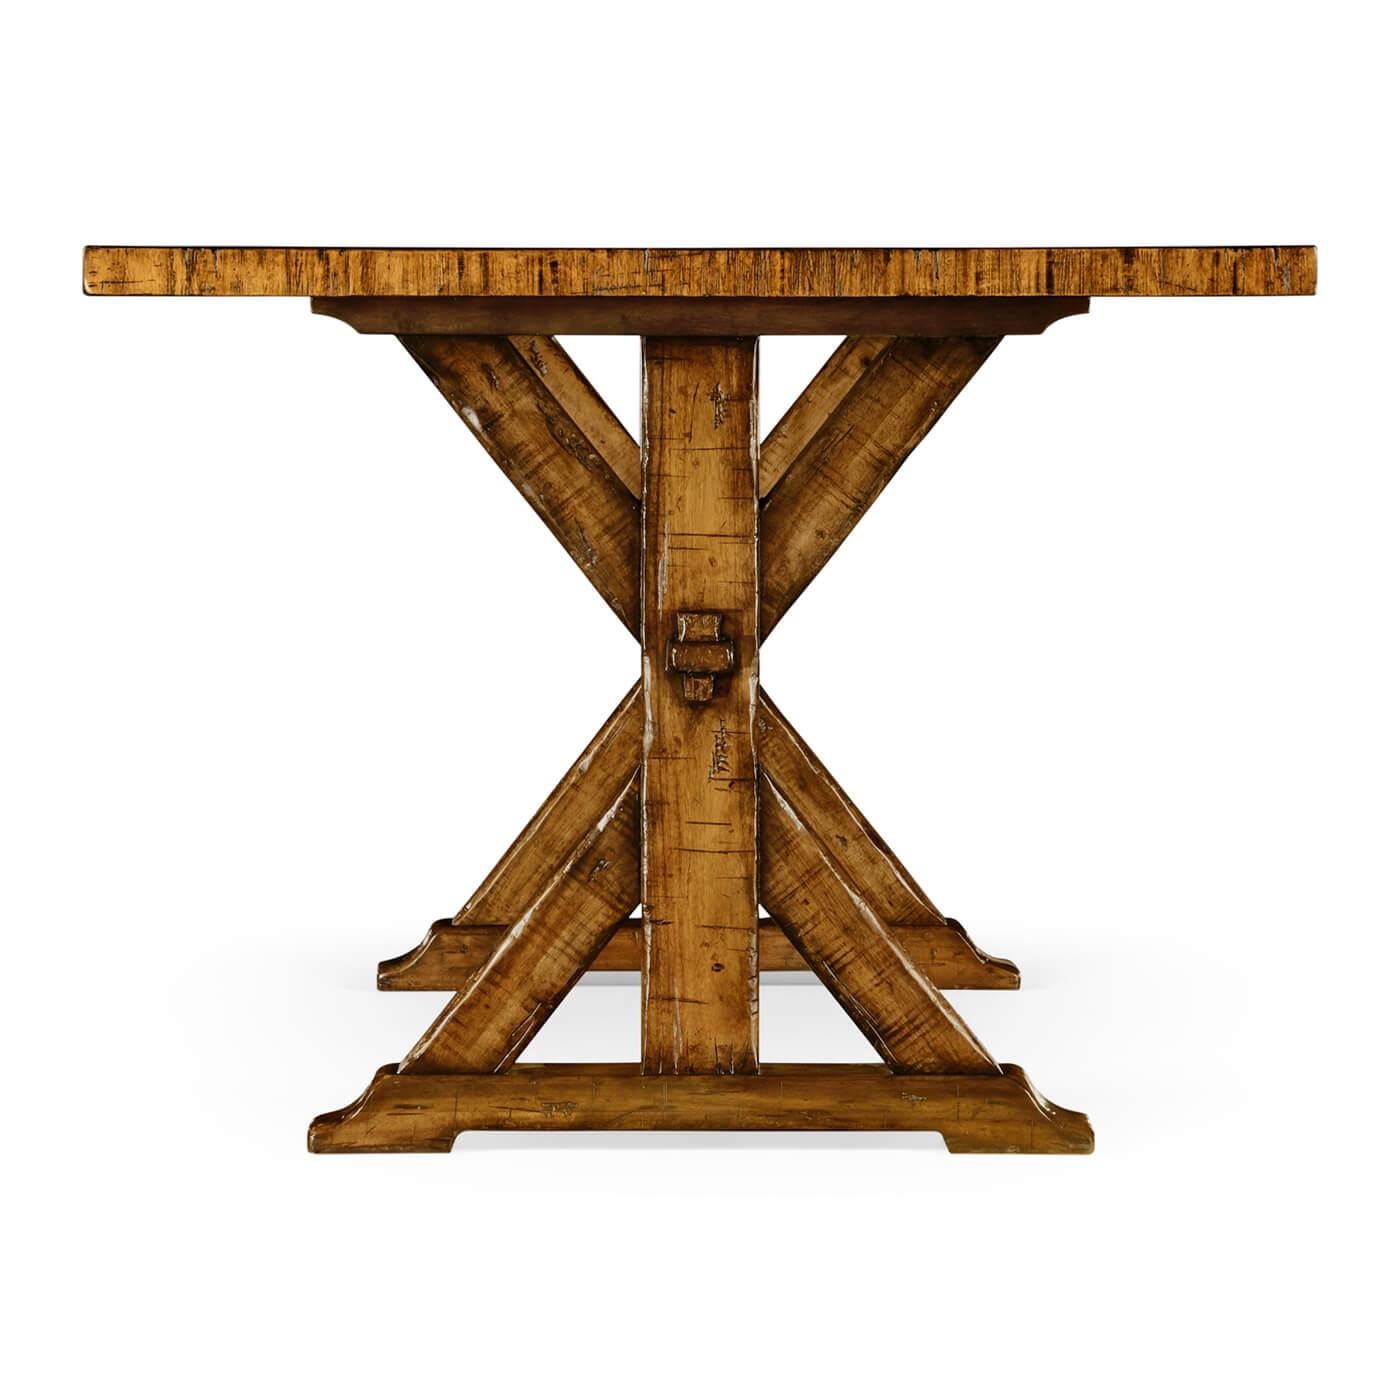 A rustic country walnut Refectory dining table with a rectangular walnut top and a rustic finish revealing exposed saw marks, with mortice and tenon joints to the stretcher and trestle end uprights.

Dimensions: 72